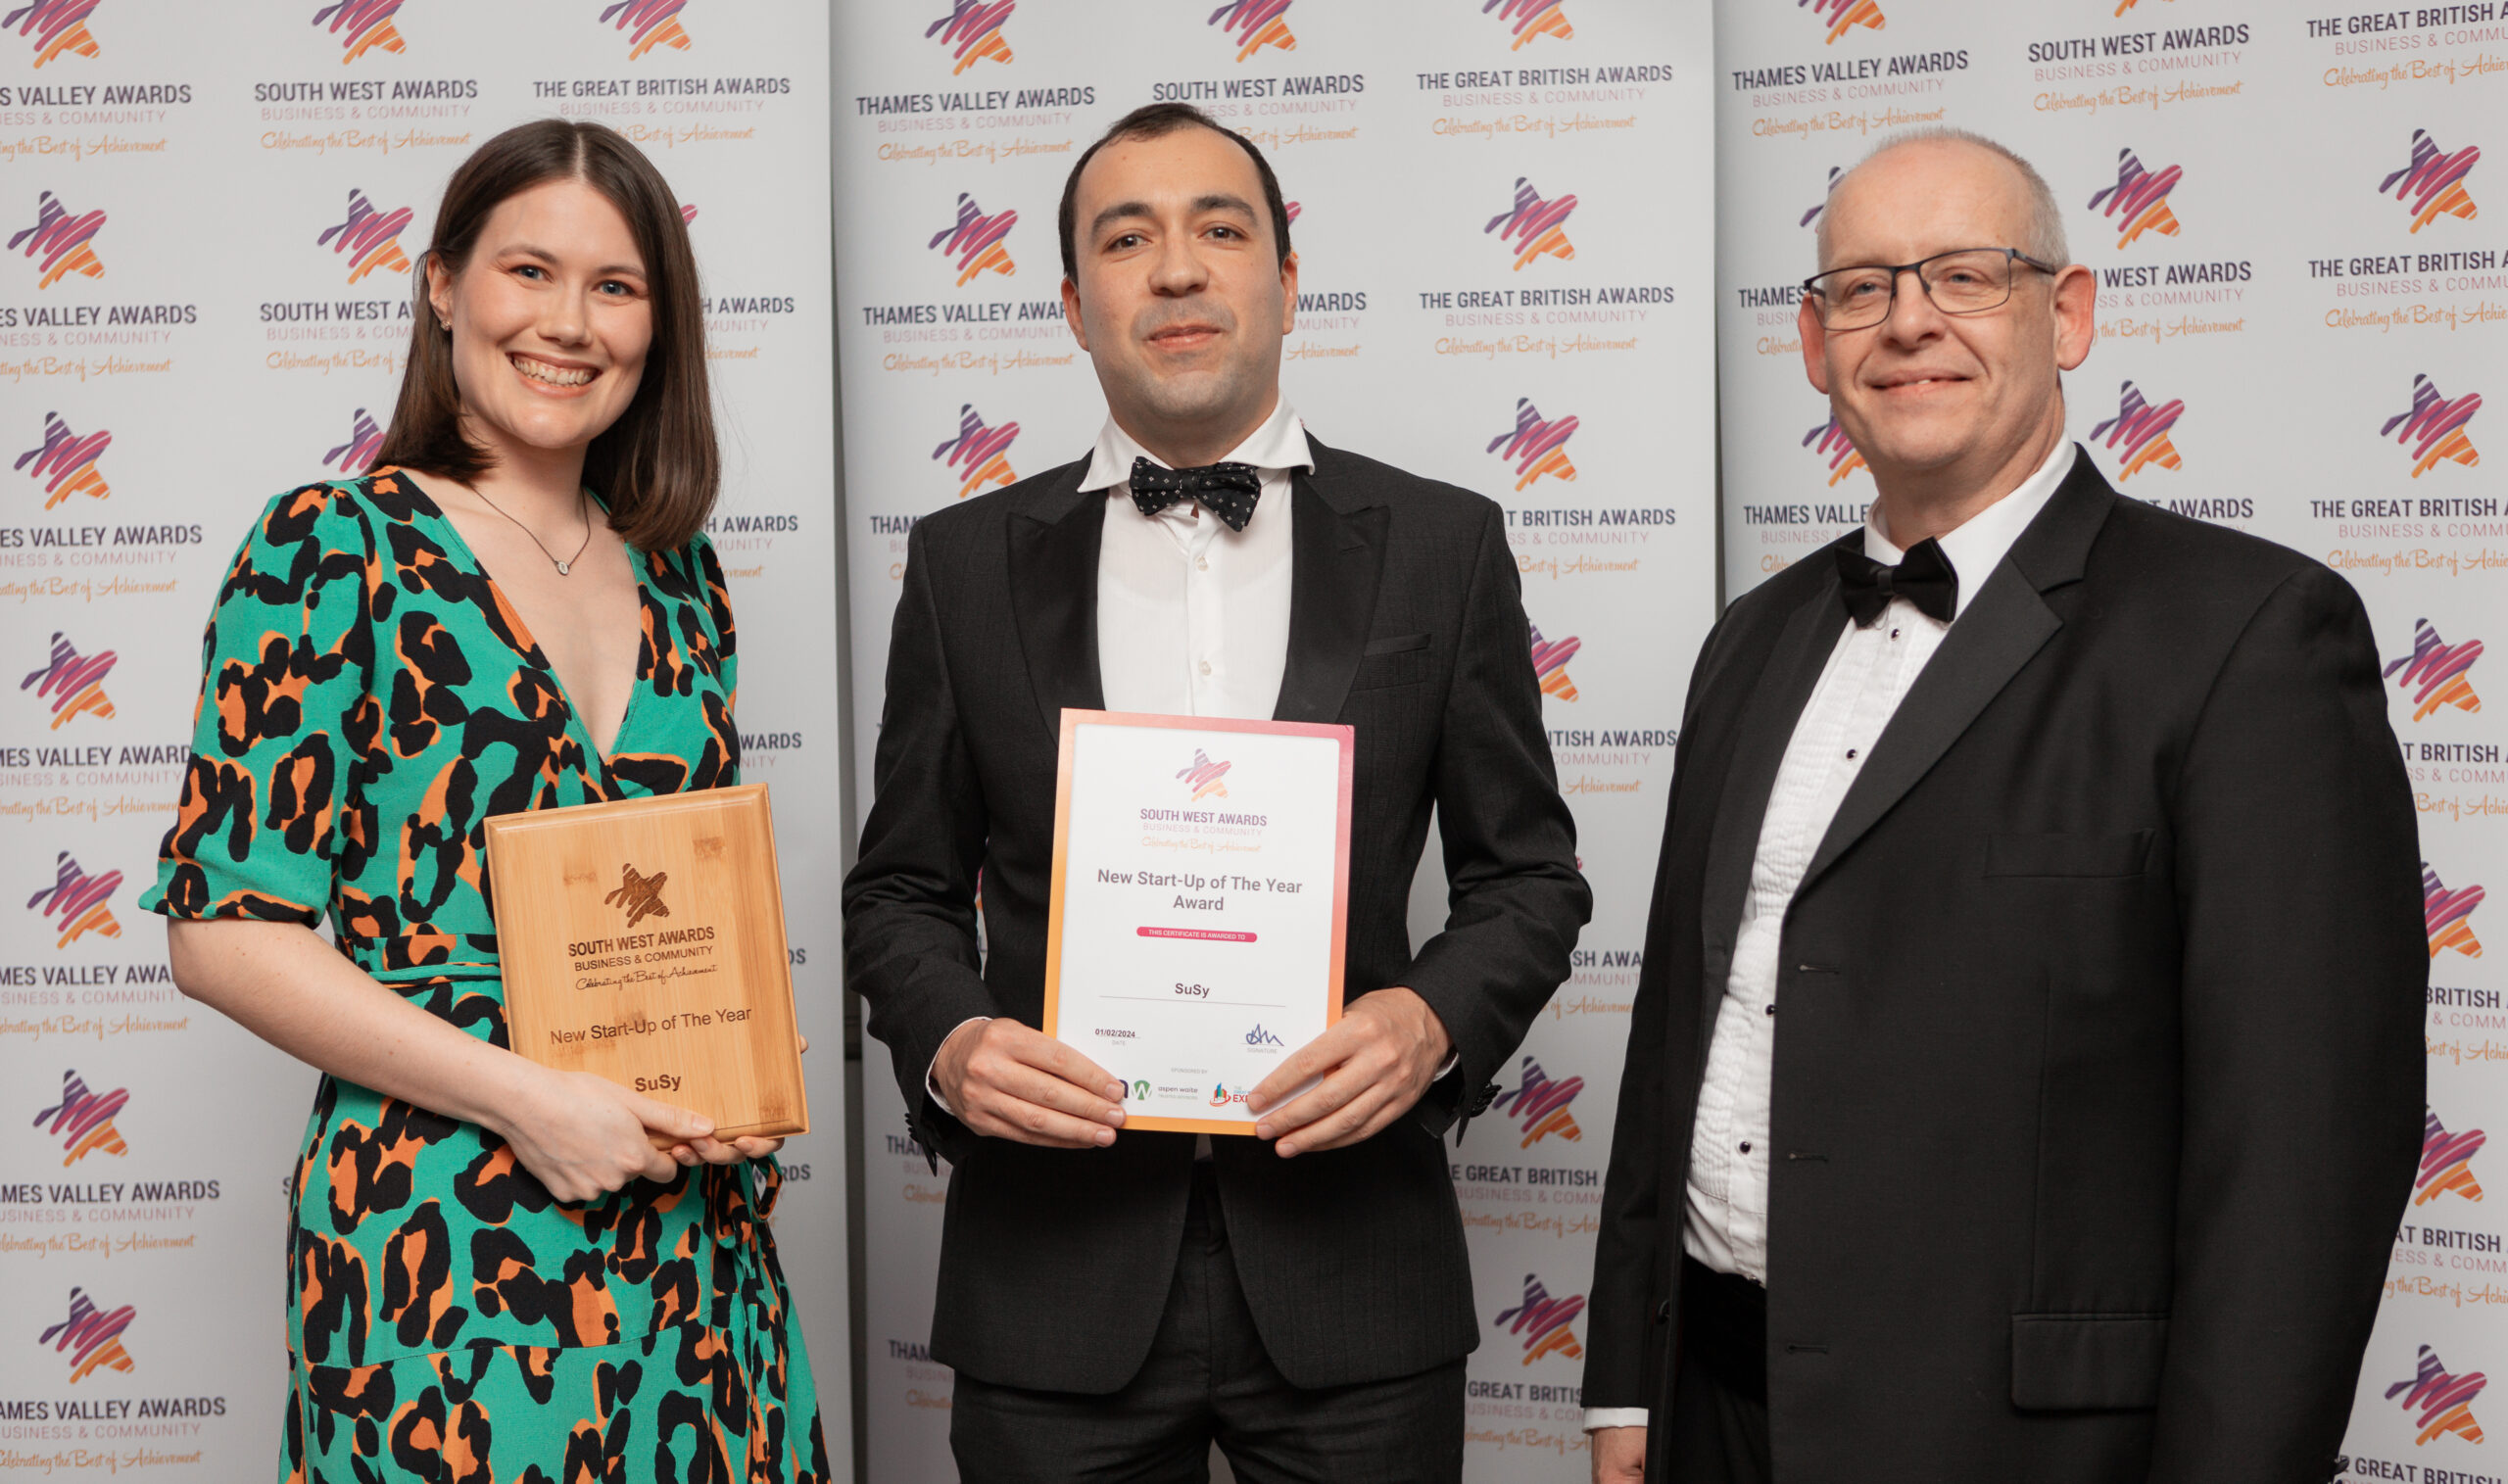 SuSy brings home two wins at the South West Business Awards